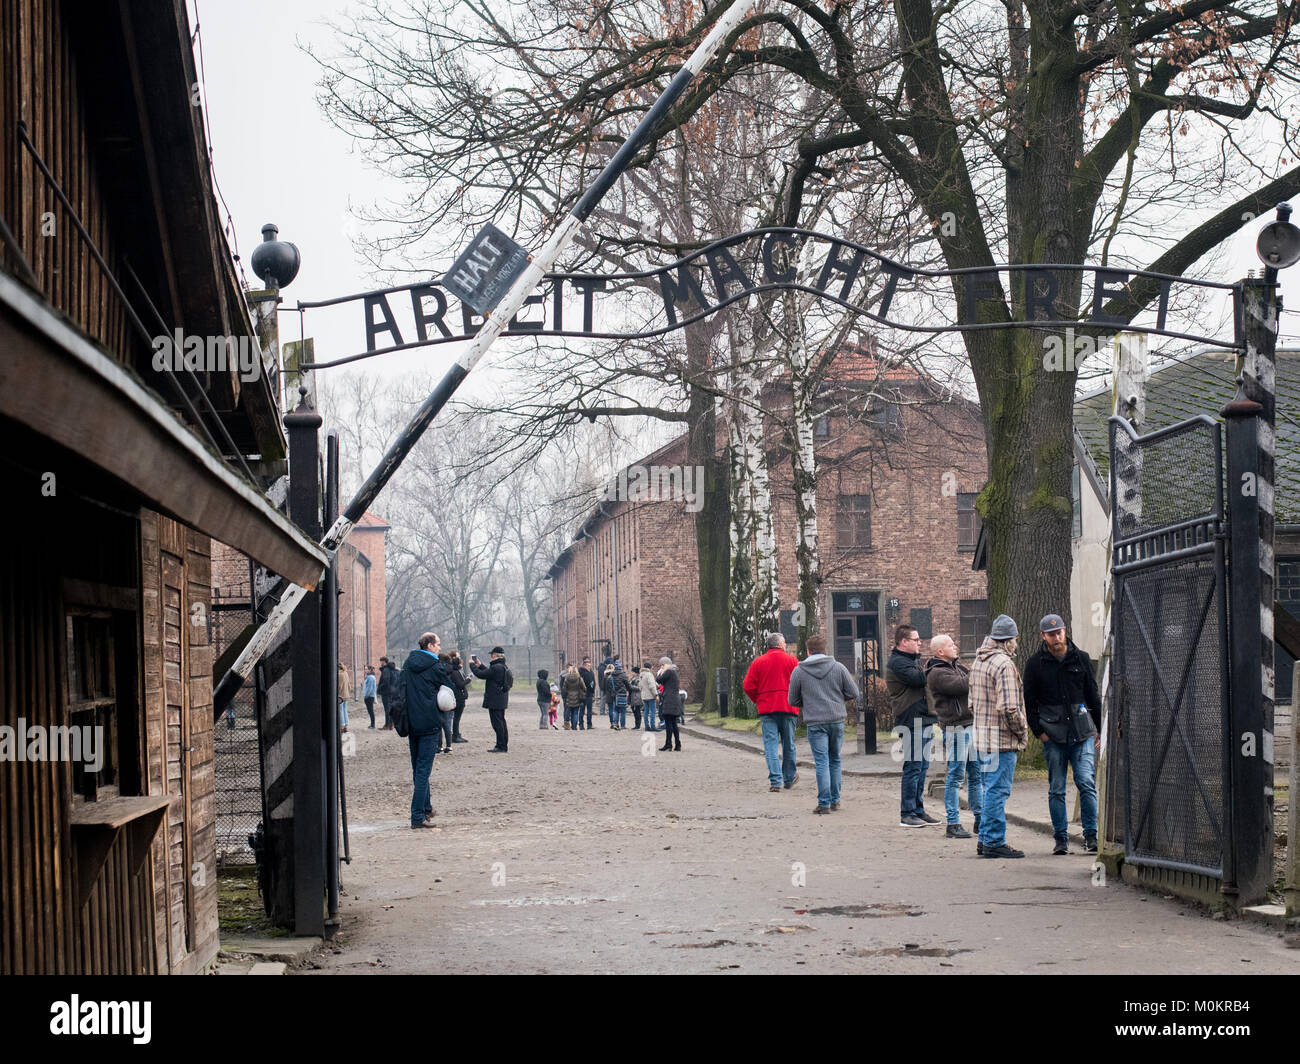 Arbeit Macht Frei sign at entrance to Auschwitz Concentration Camp, near Krakow, Poland Stock Photo